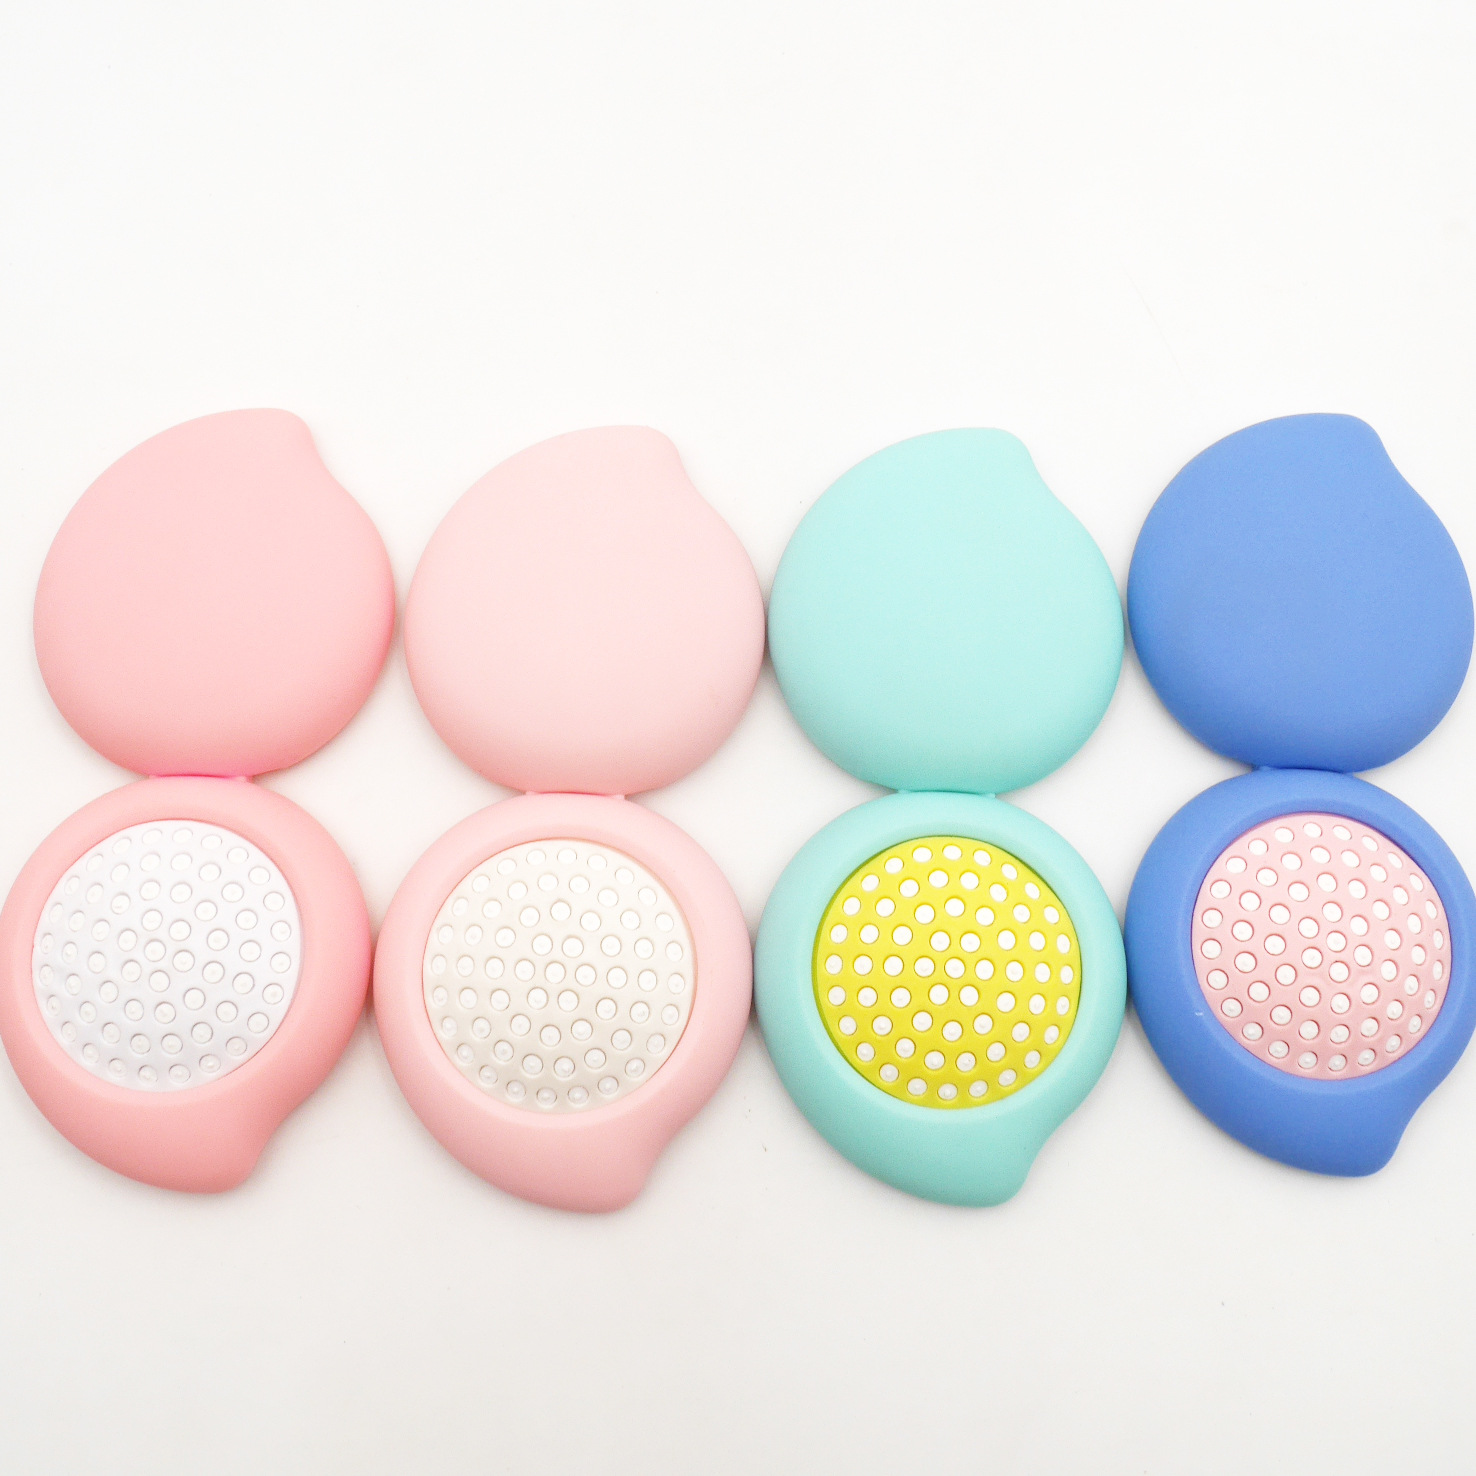 factory direct sales new cute children‘s peach-shaped folding airbag mirror comb hairdressing comb portable massage comb makeup comb